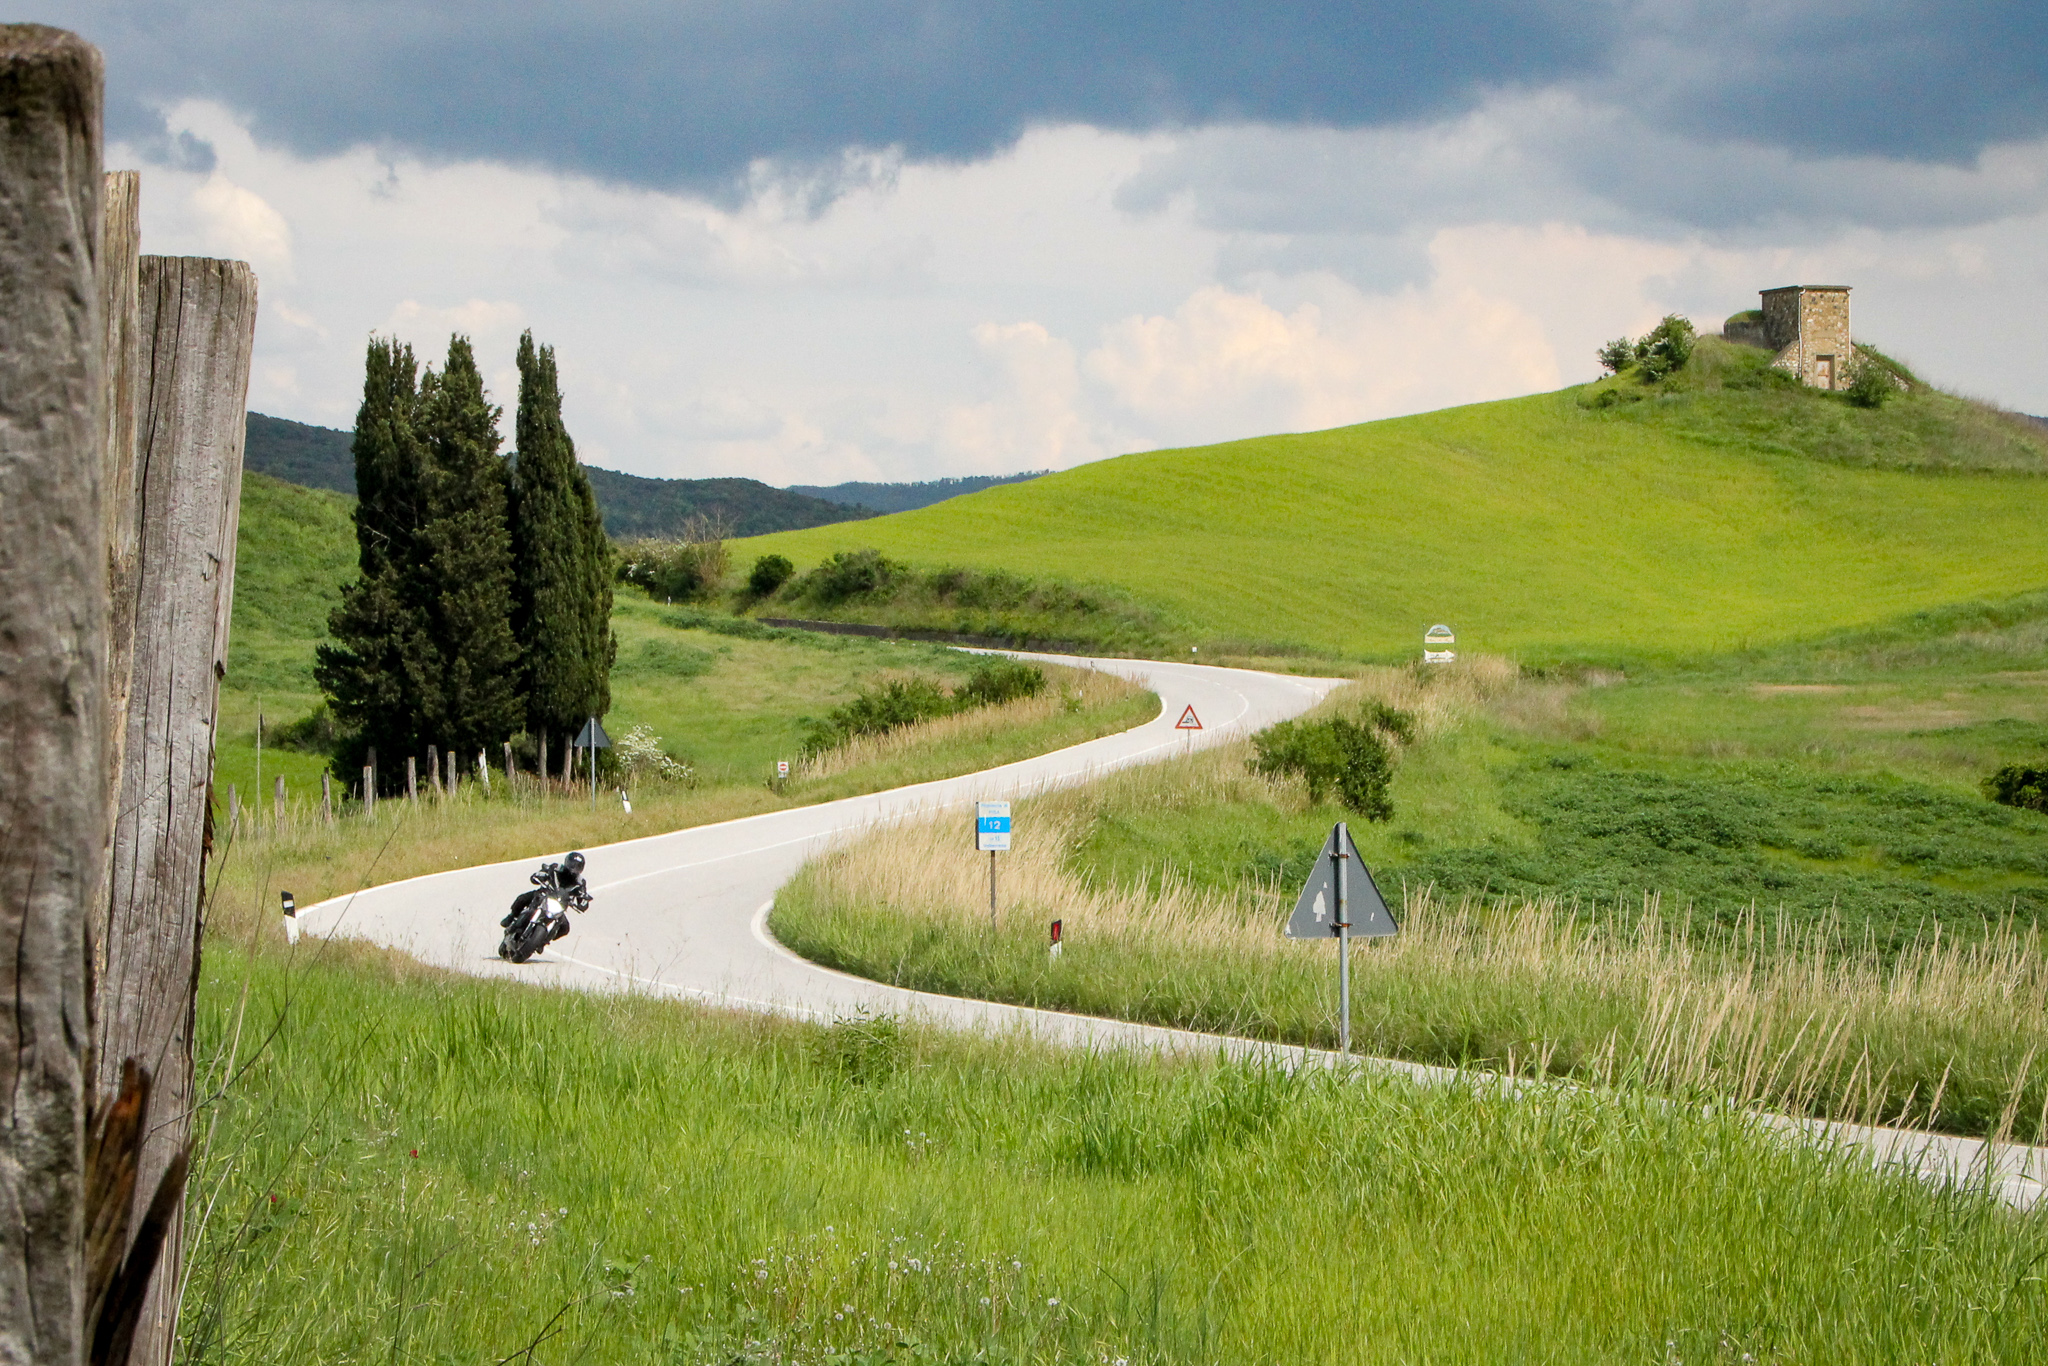 Discovering Italy on a motorcycle: how different are the Dolomites from Tuscany, Sardinia and Sicily?